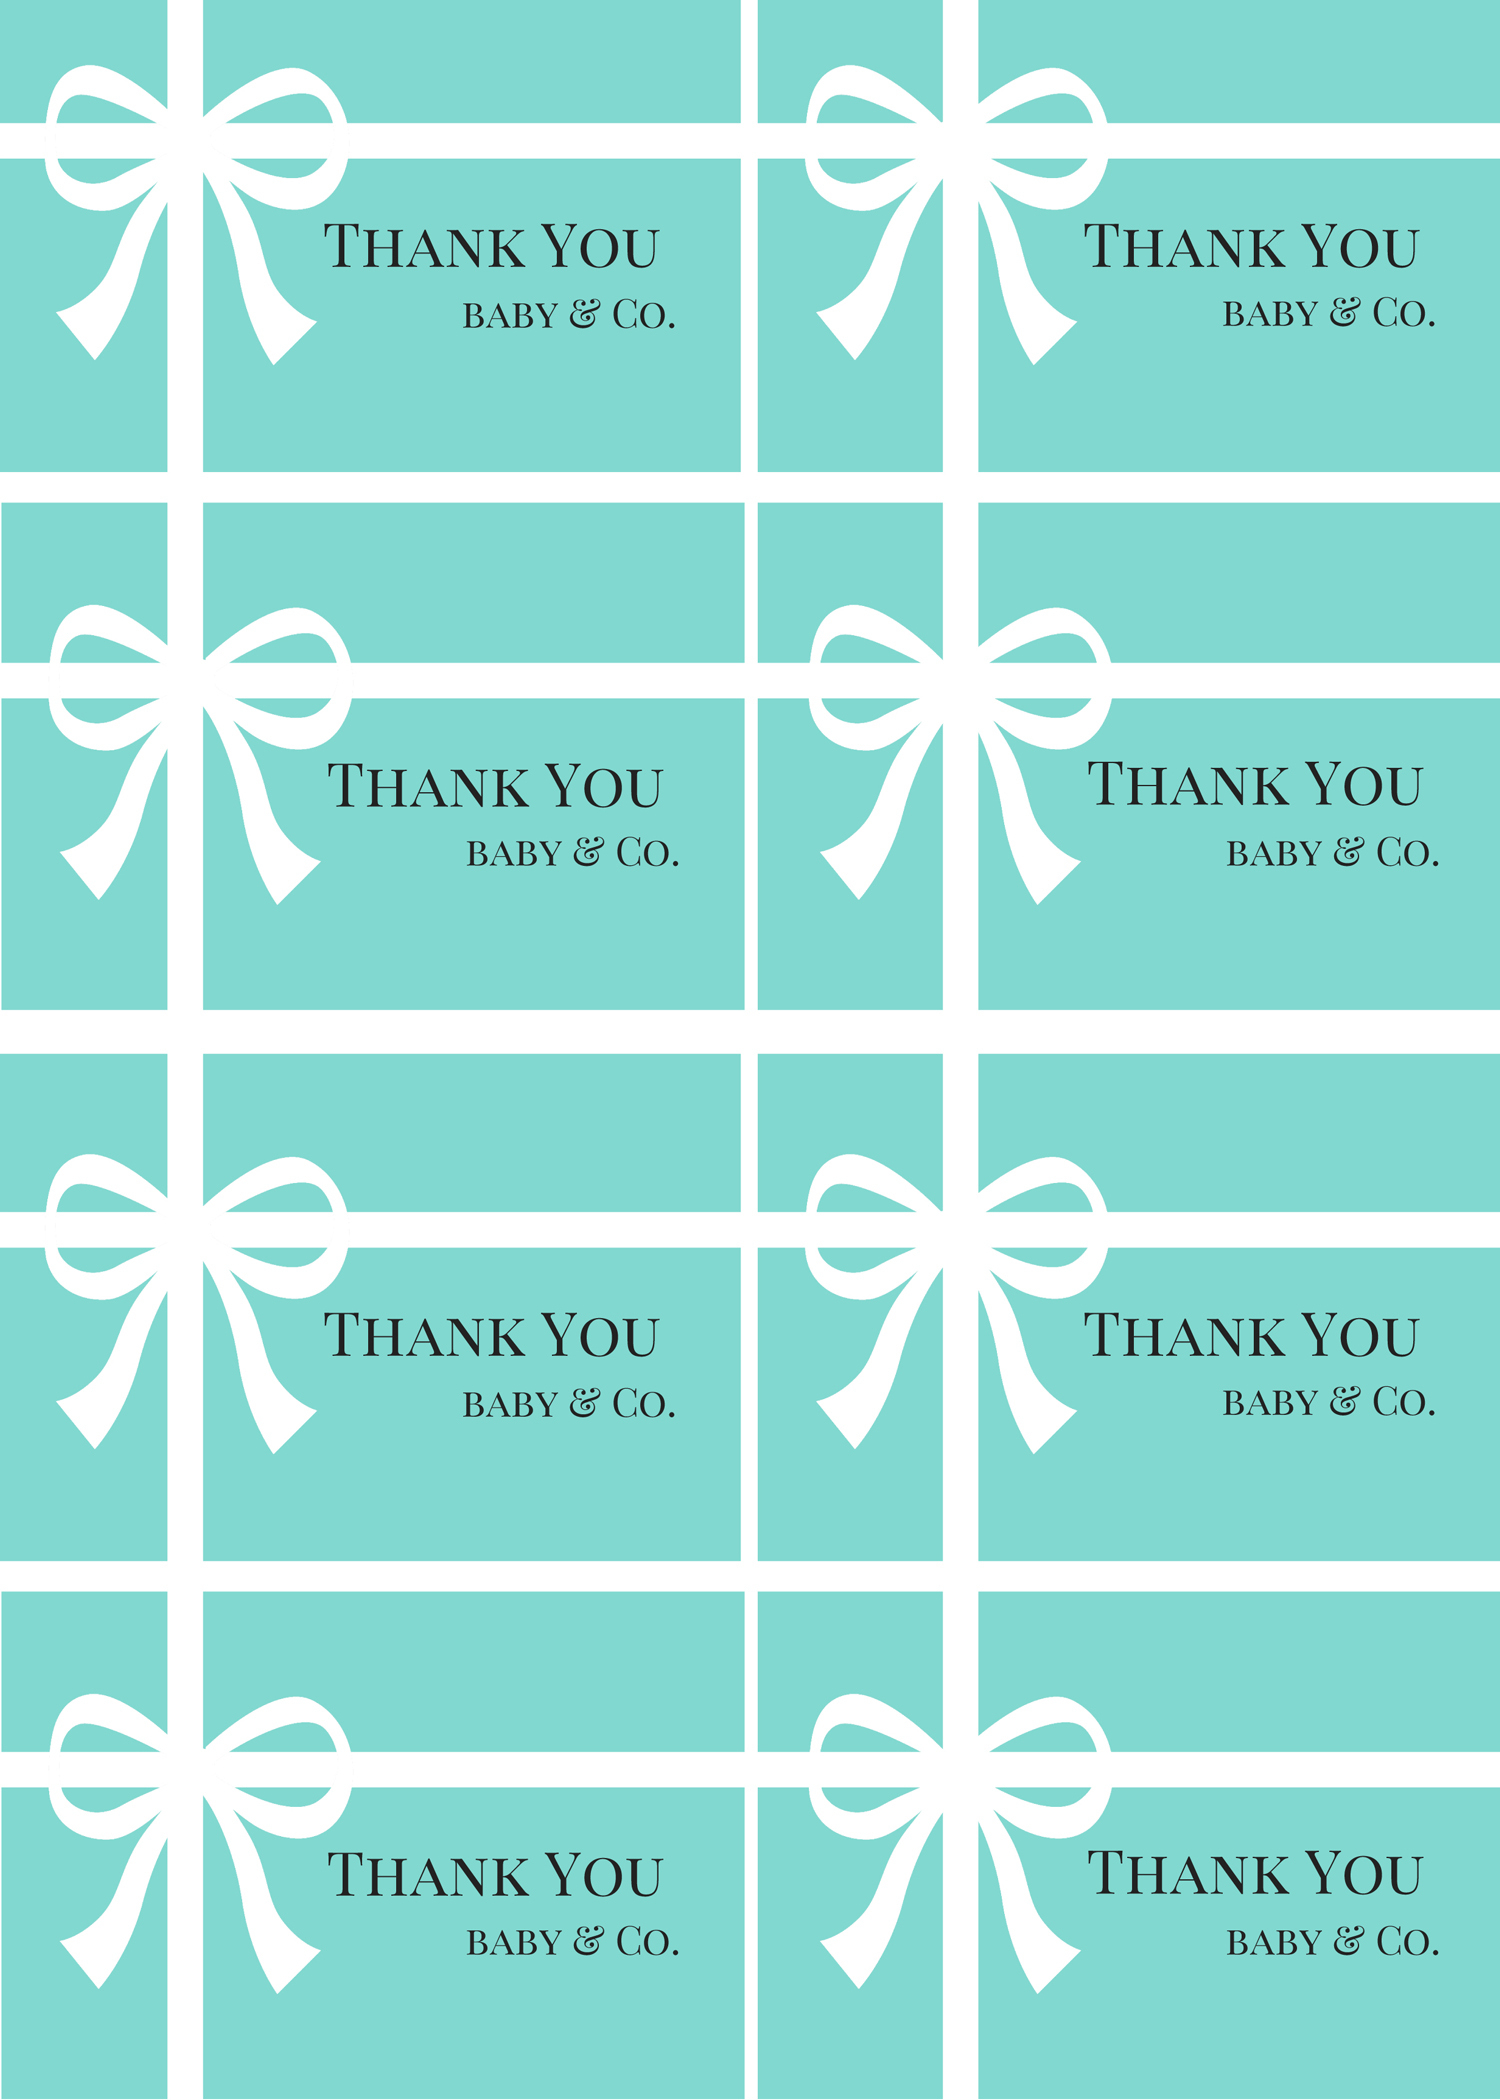 Free Baby Shower Thank You Tags Printables - Baby Shower Ideas - Free Printable Baby Shower Labels And Tags